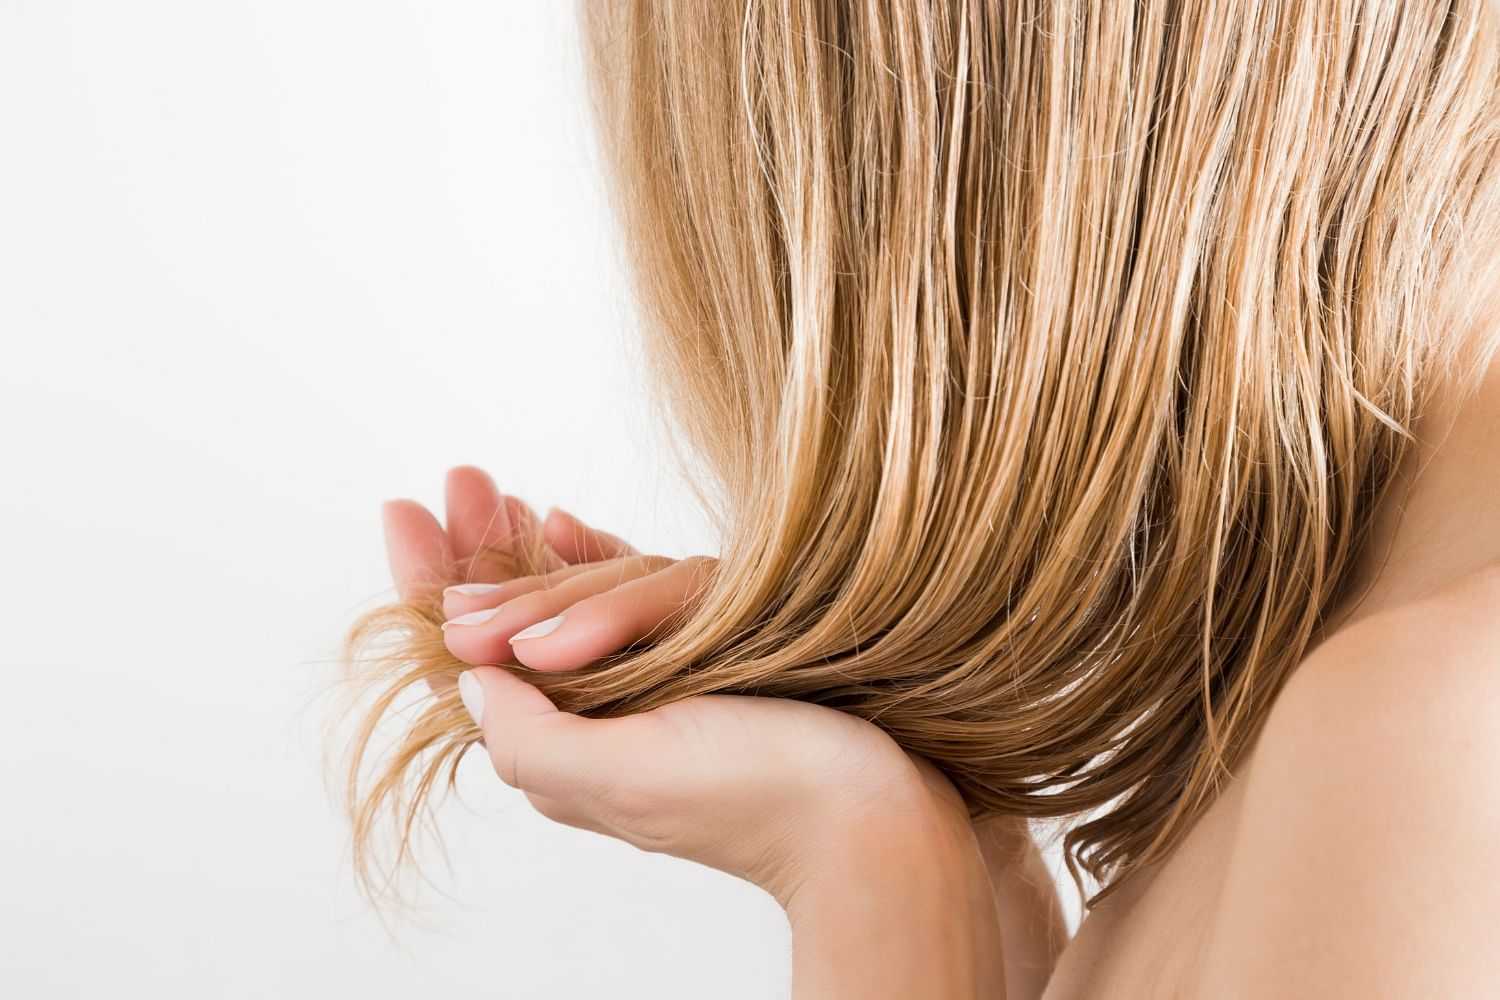 Woman examining her hair ends against a white background.